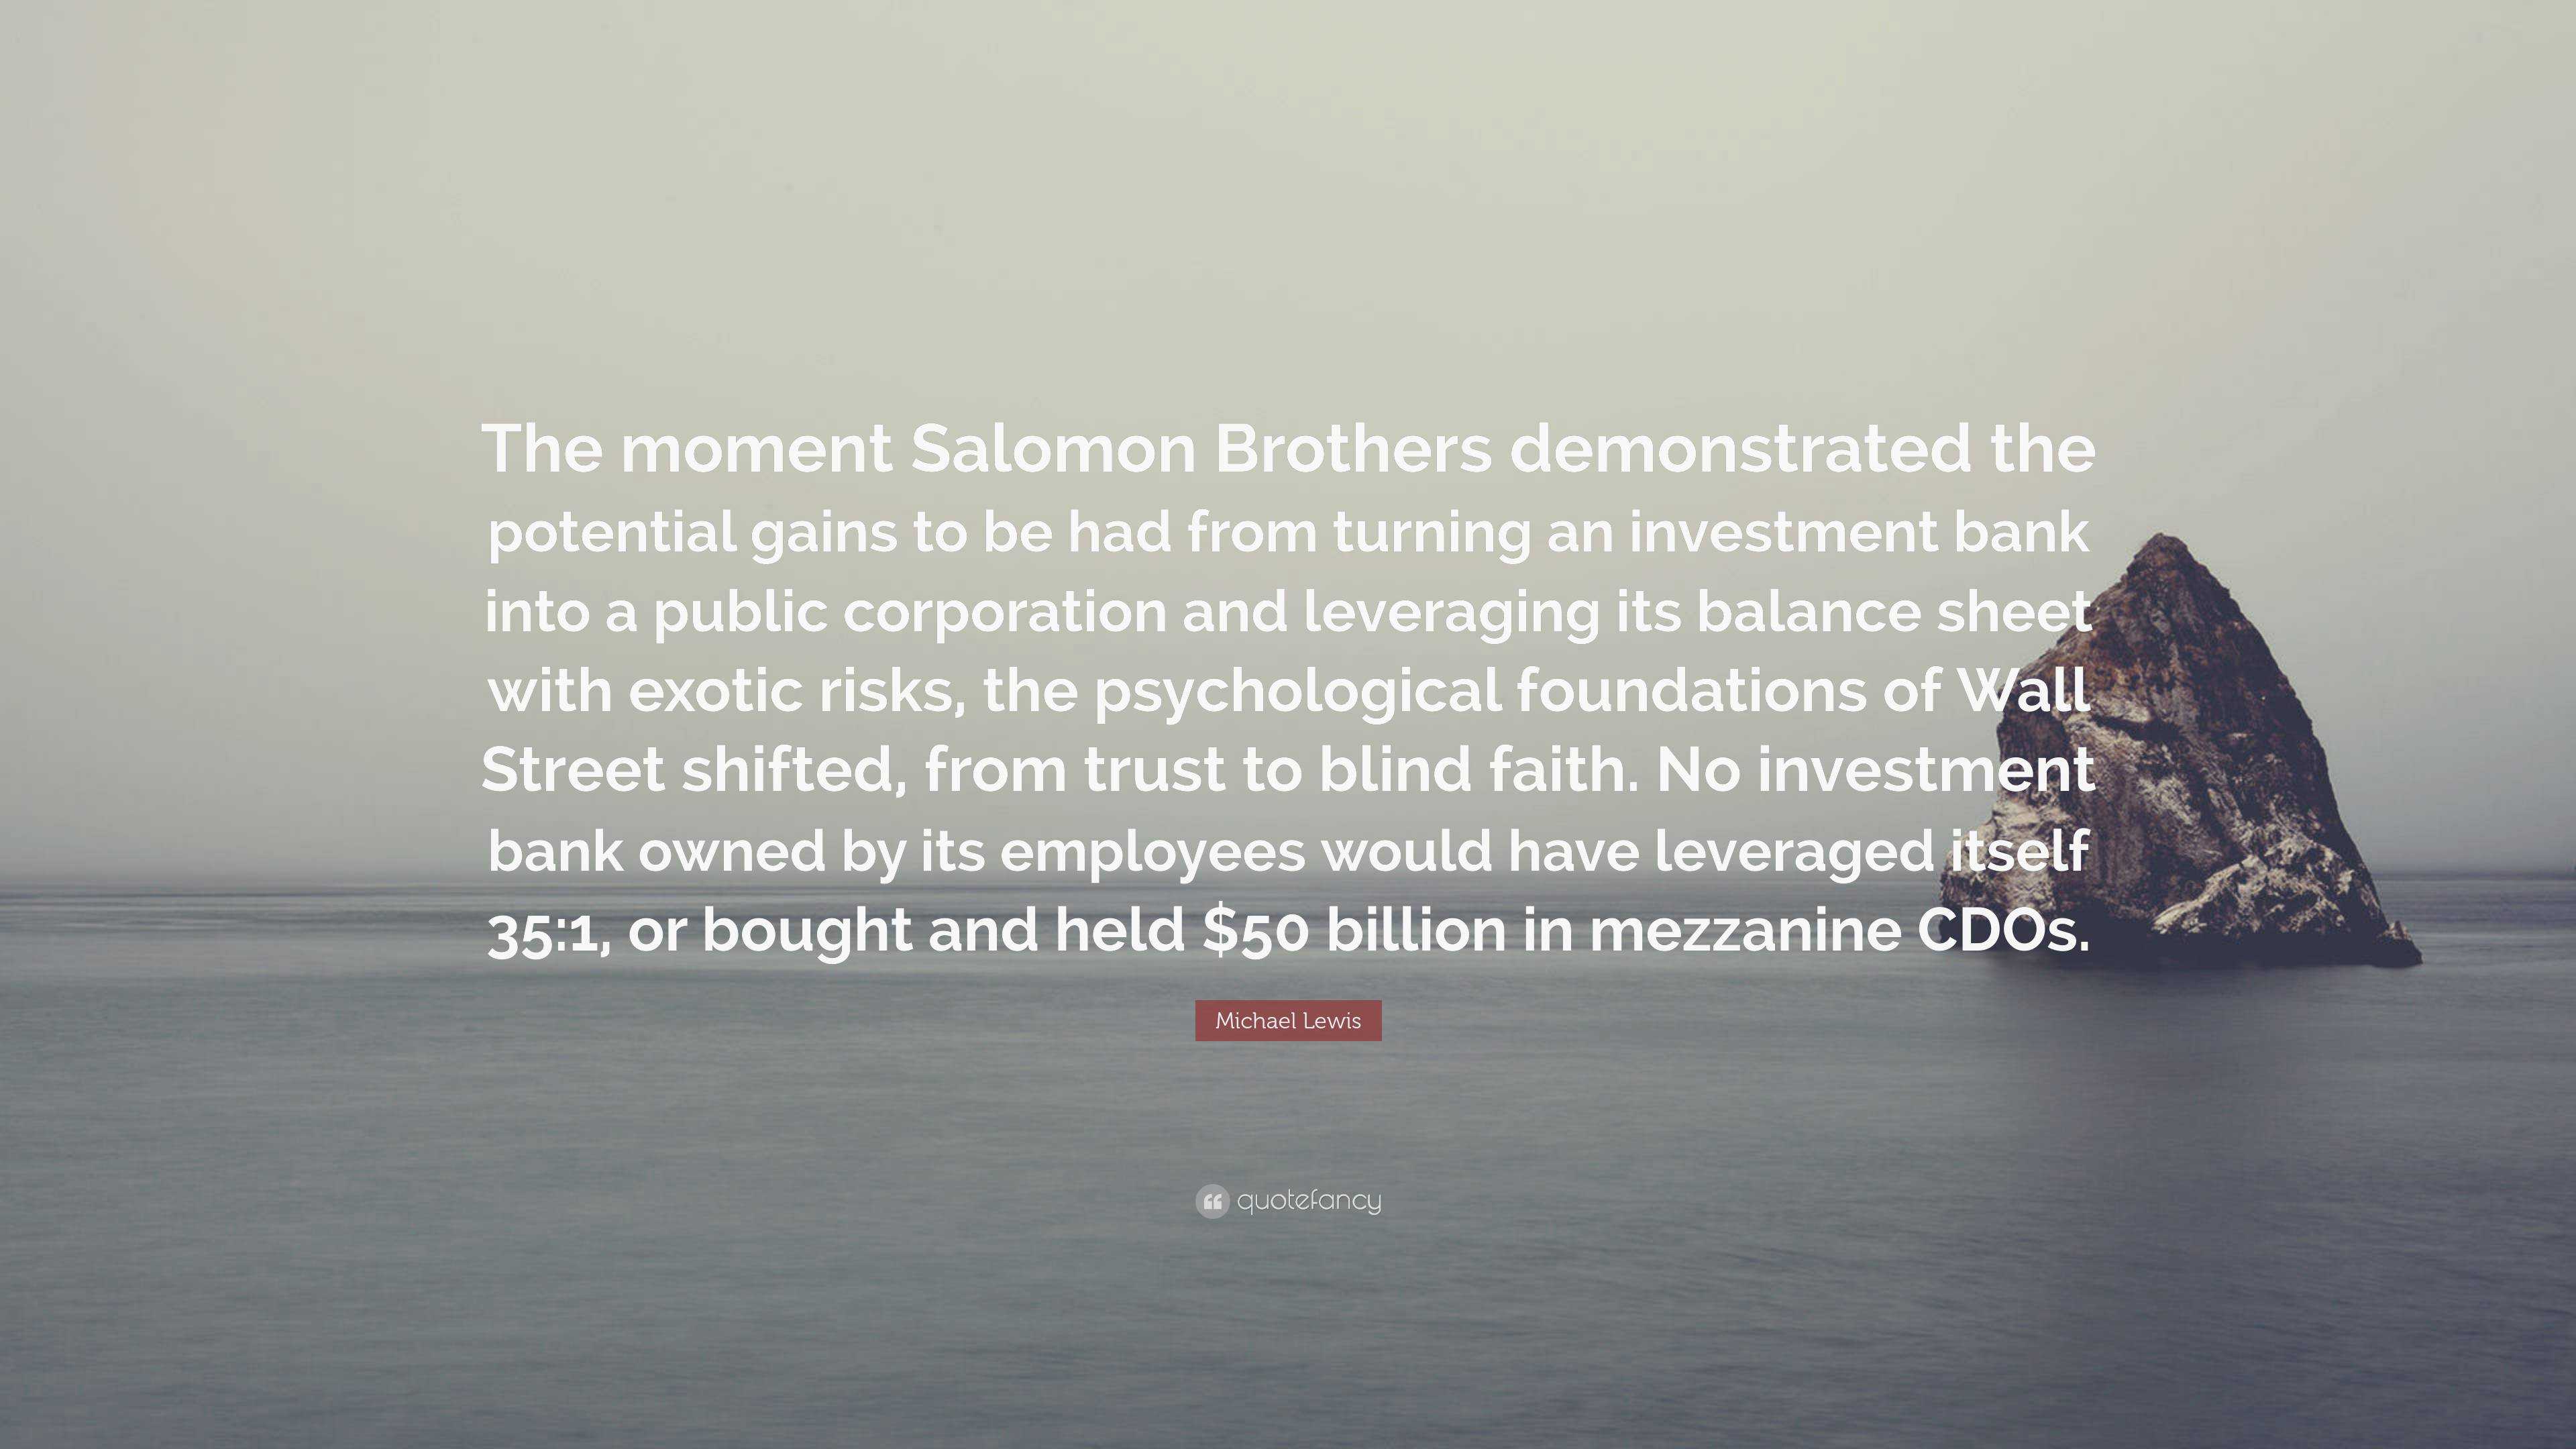 Echt Psychologisch Misschien Michael Lewis Quote: “The moment Salomon Brothers demonstrated the  potential gains to be had from turning an investment bank into a public  cor...”